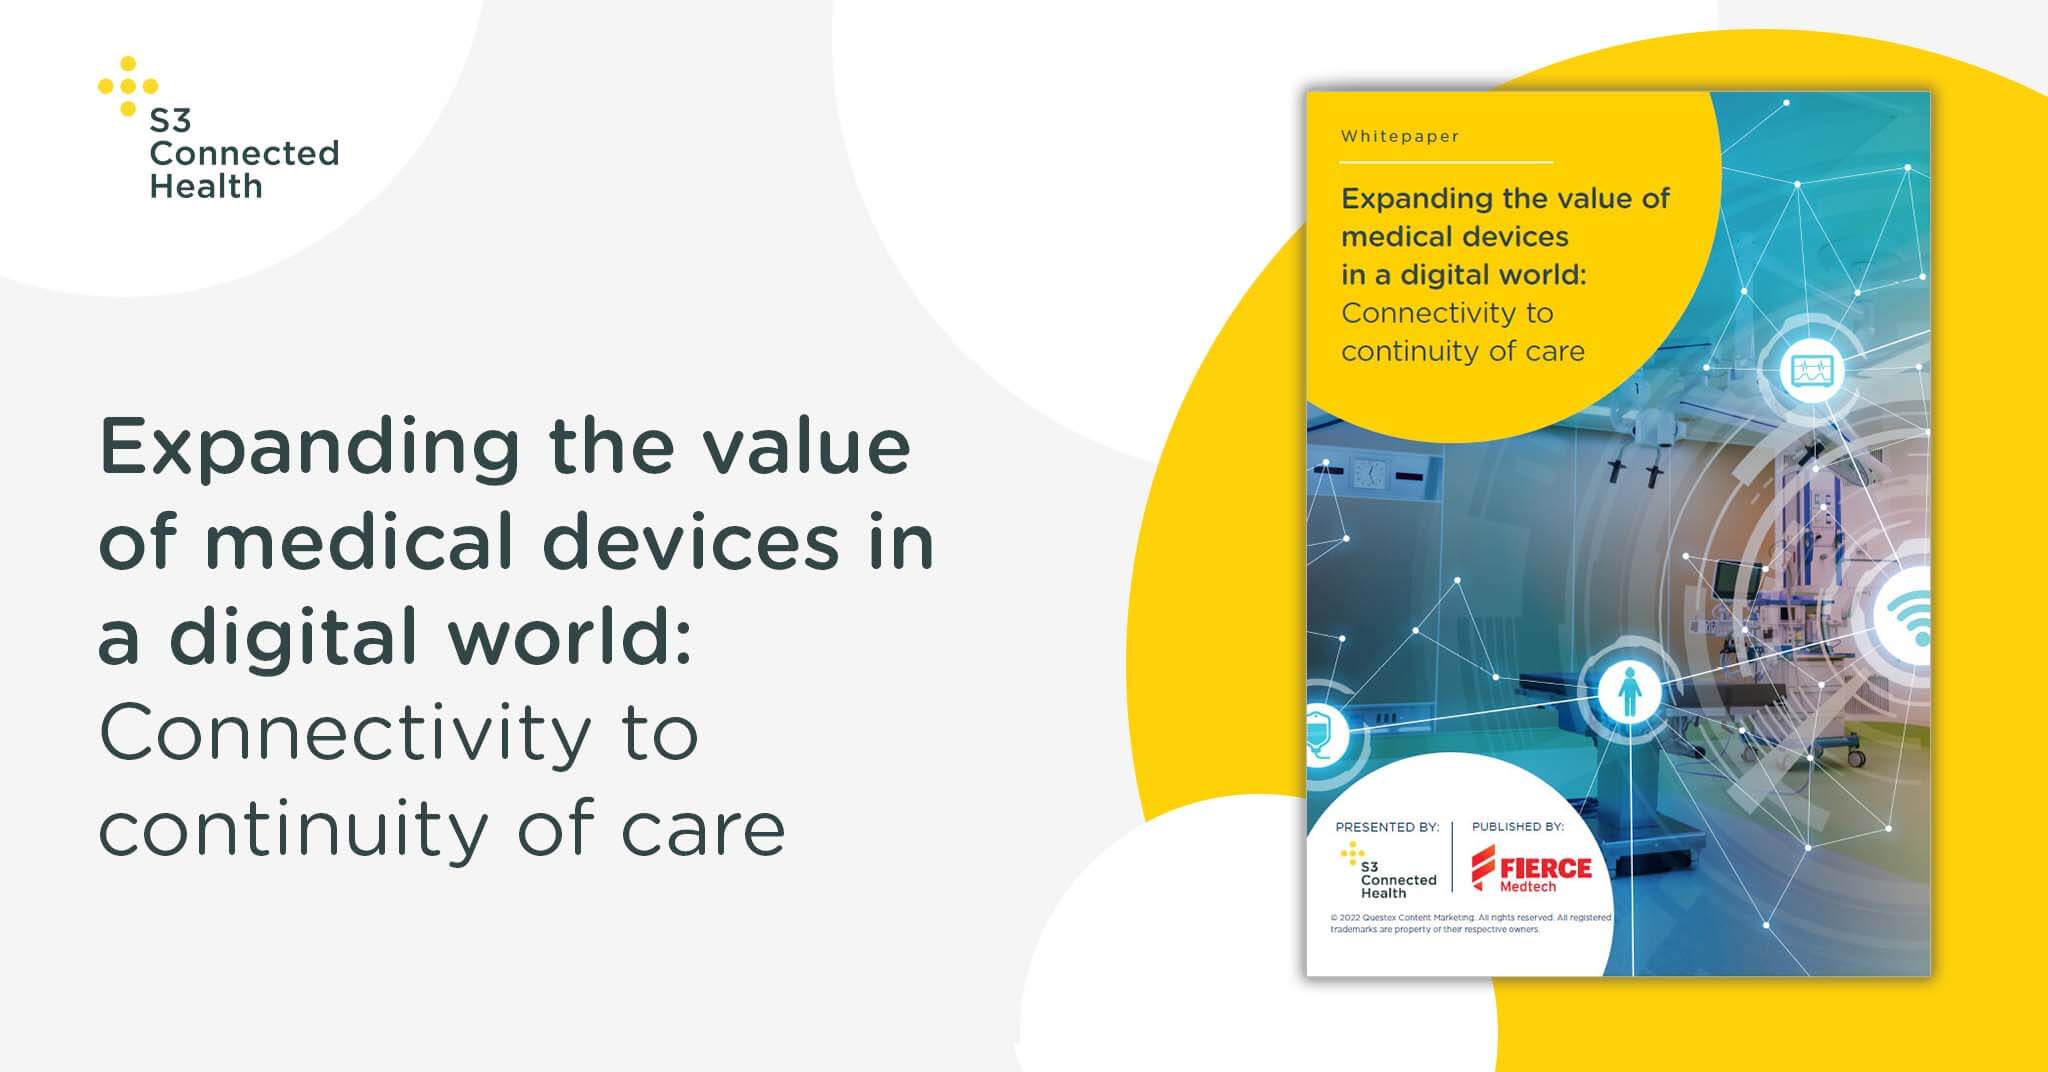 Whitepaper release: Expanding the value of medical devices in a digital world: Connectivity to continuity of care